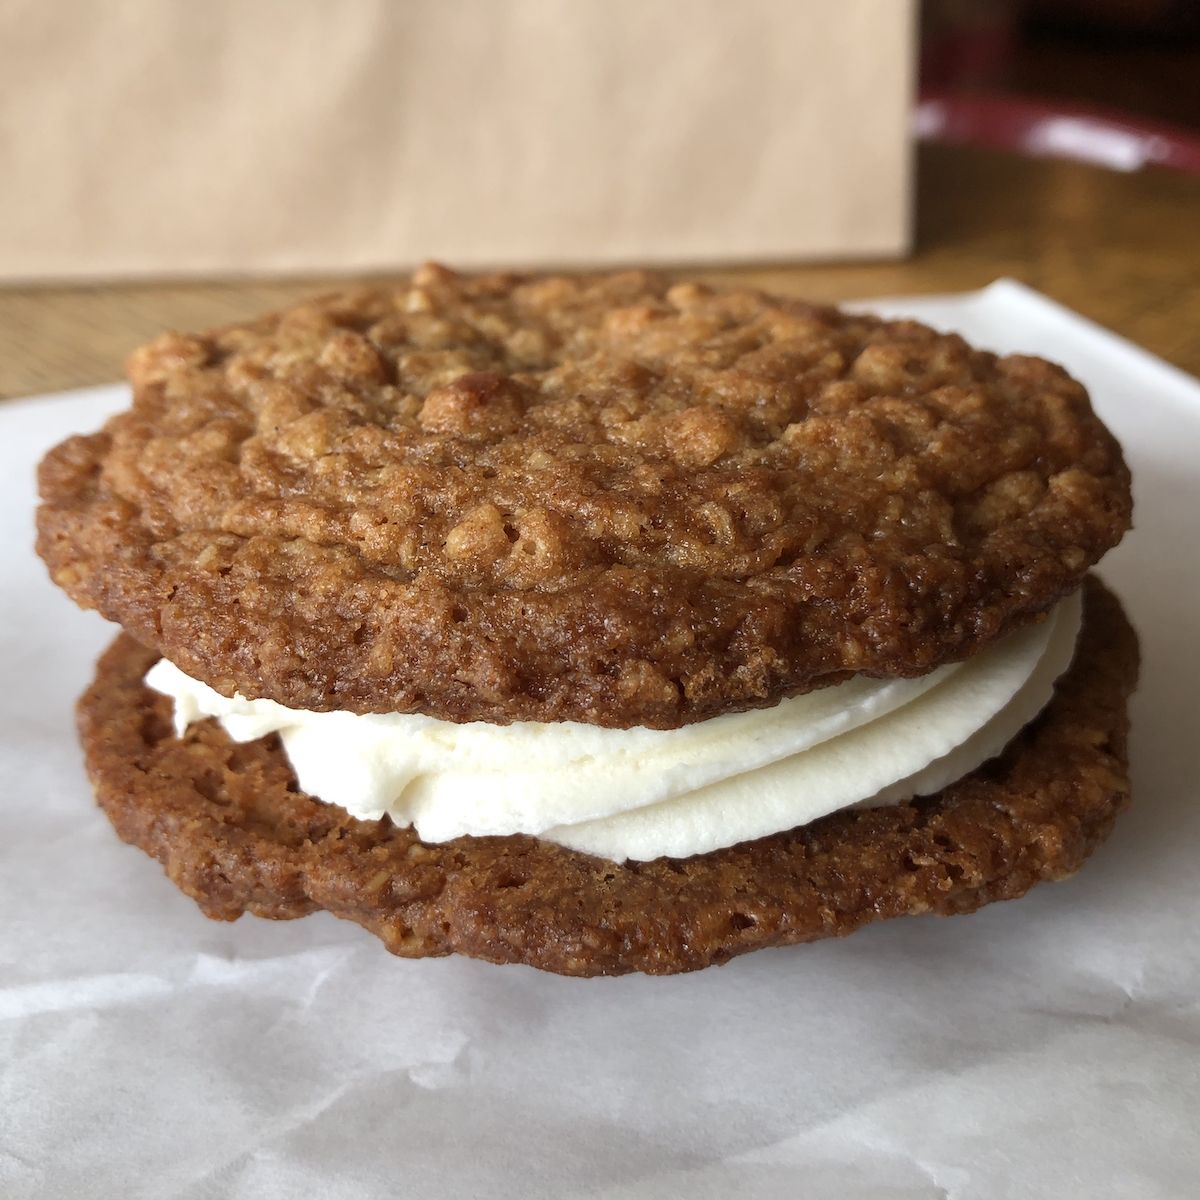 The Oatmeal Cream Pie from Swine and Sons in Orlando, Florida